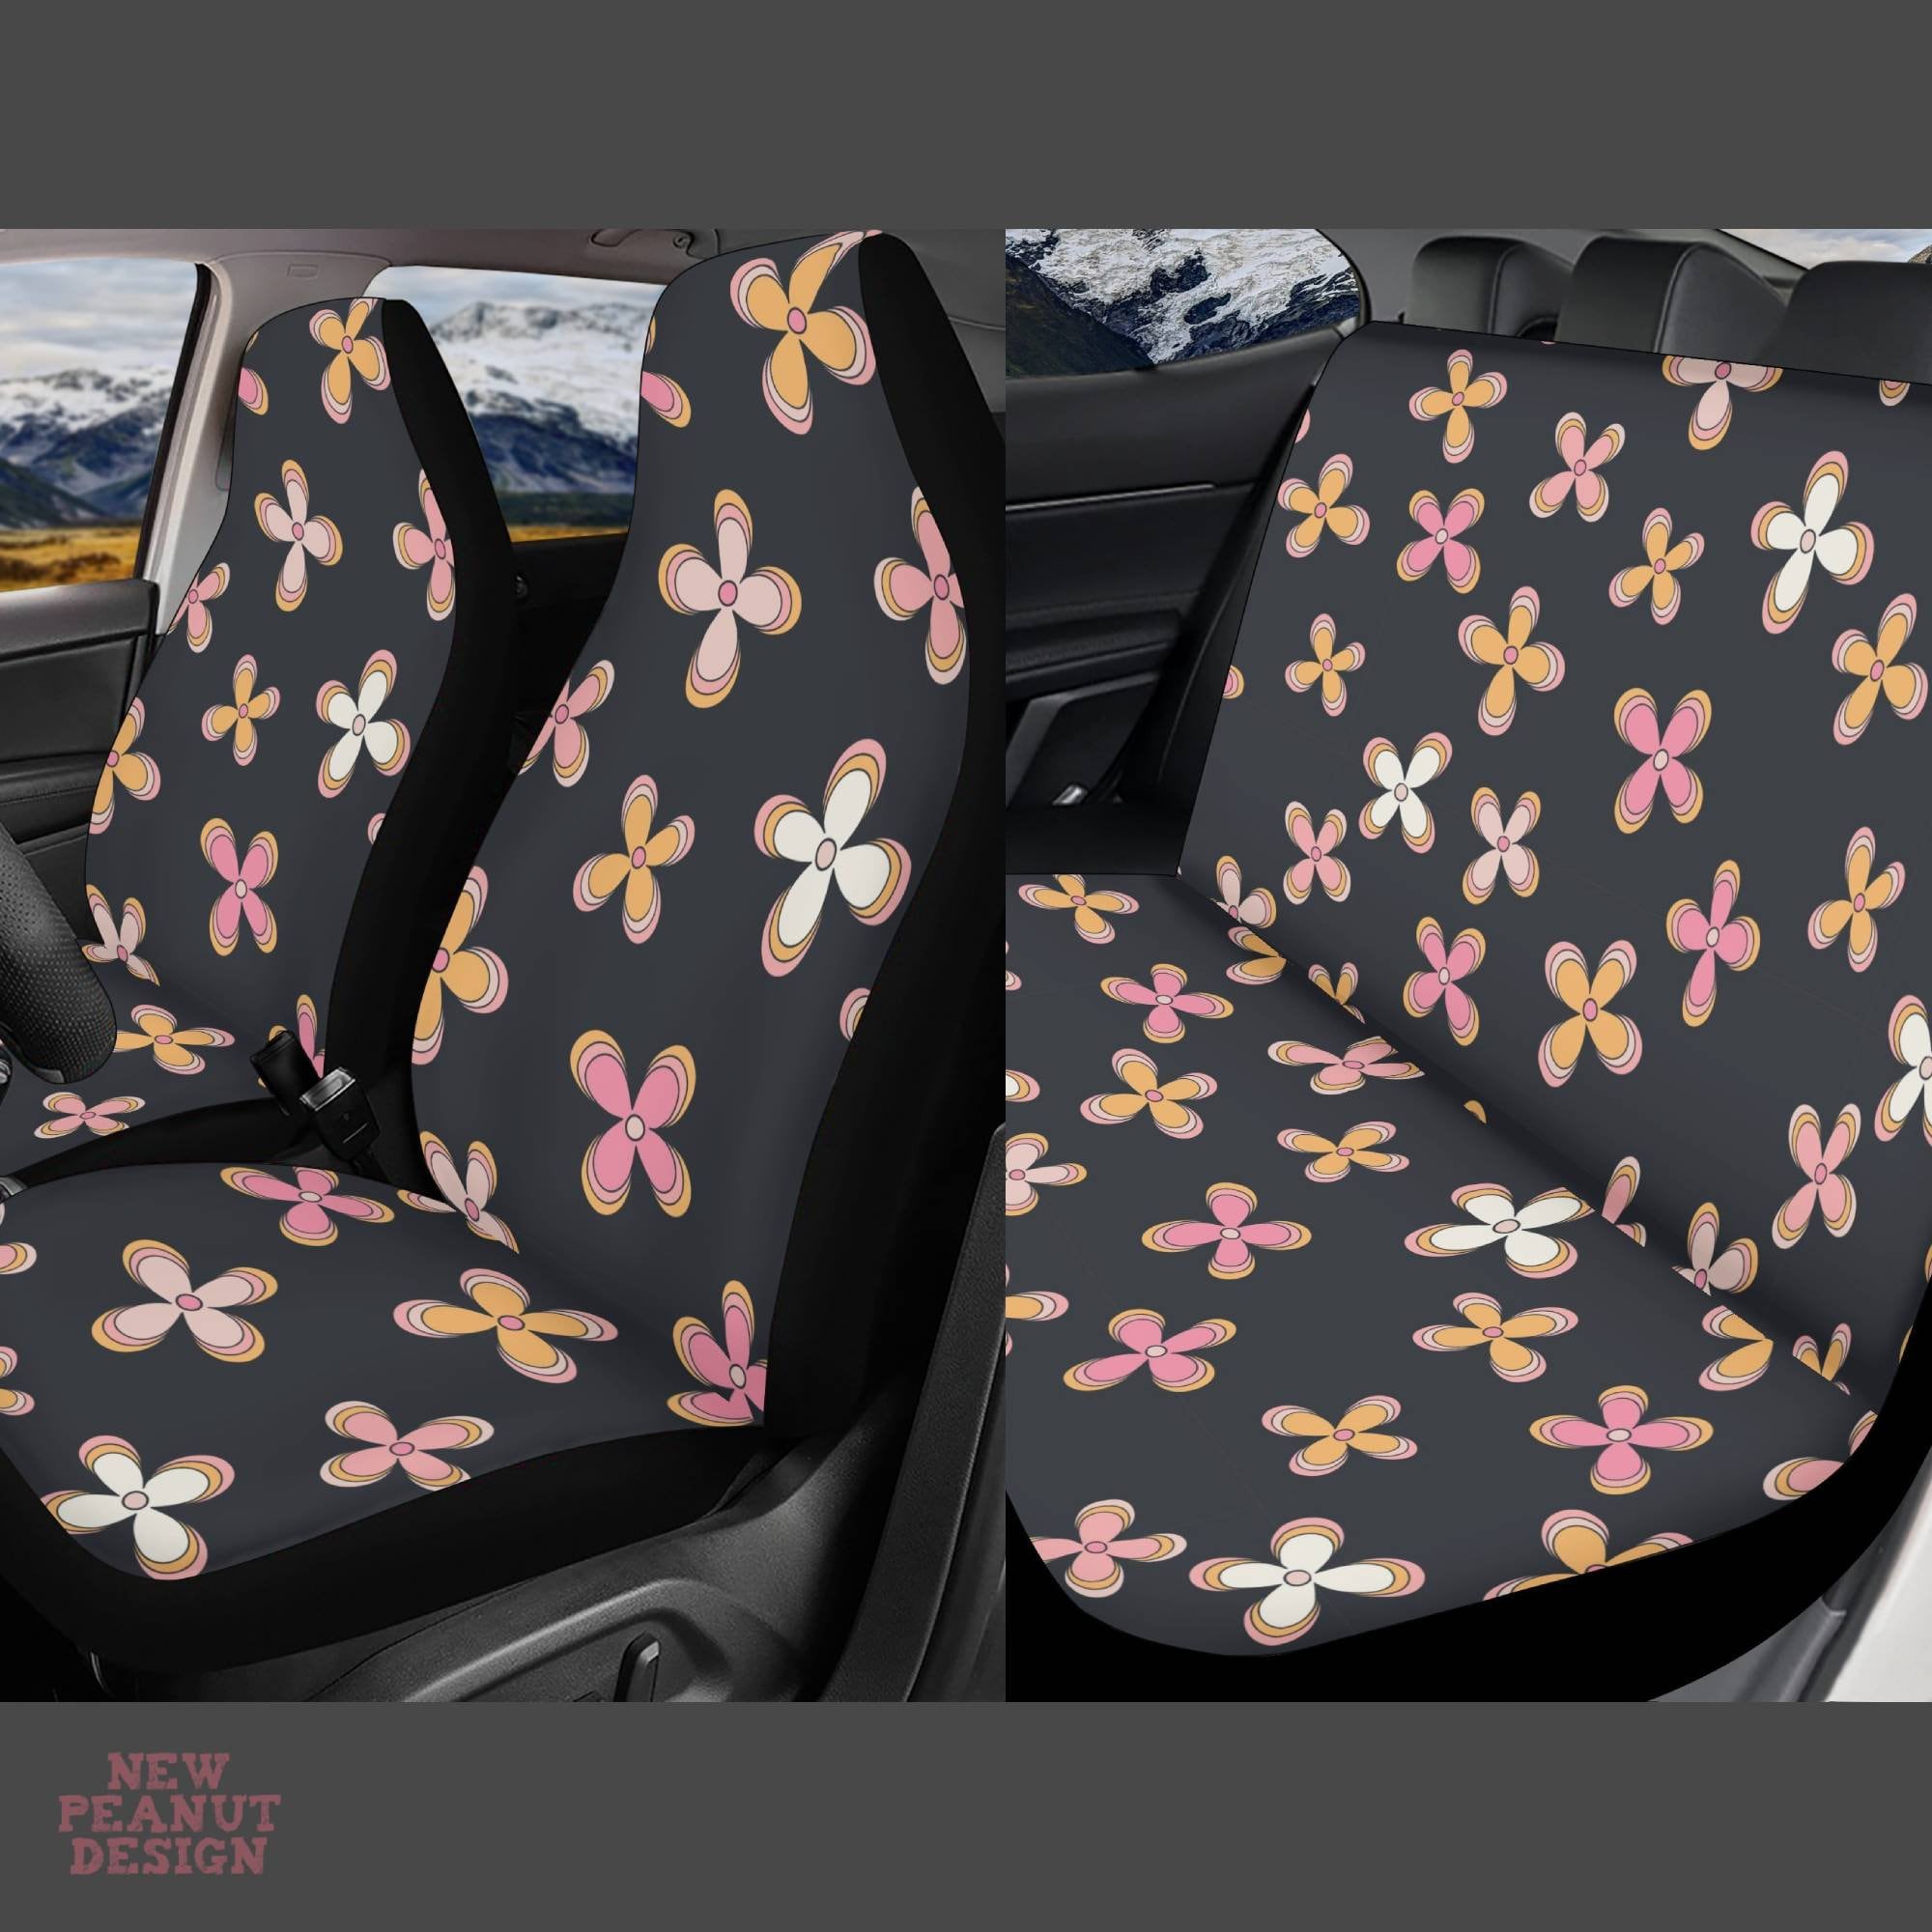 Discover Boho Floral Car Seat Cover, Black Flower Seat Covers